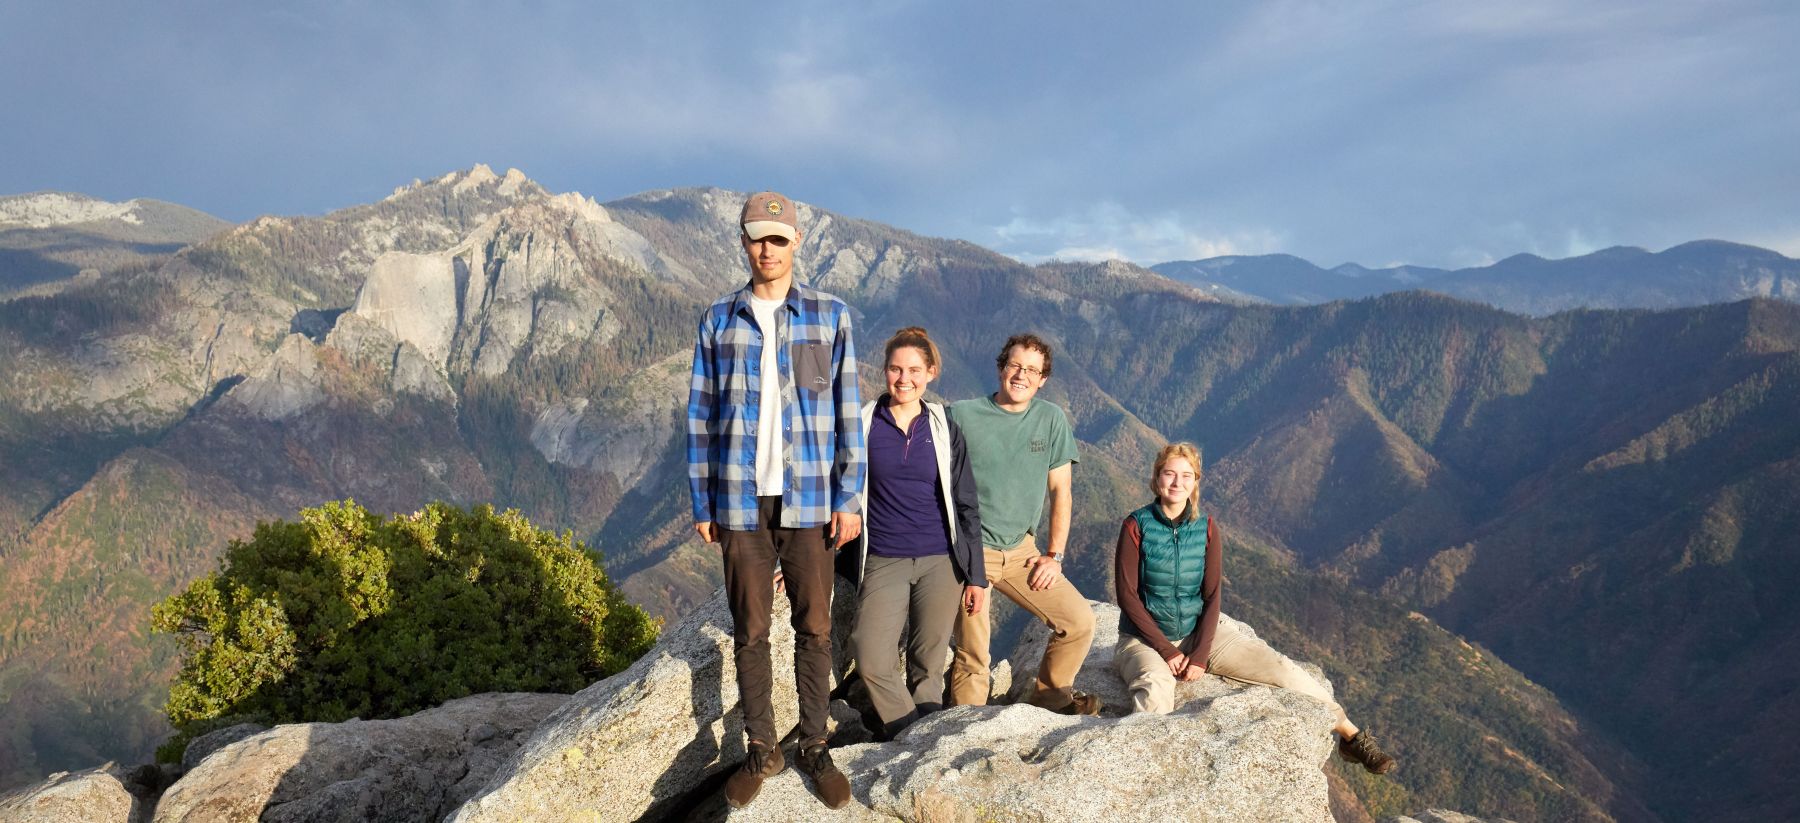 Field crew after a long day of rigging trees for canopy sampling in Sequoia National Park, CA. Photo credit: Anthony Ambrose